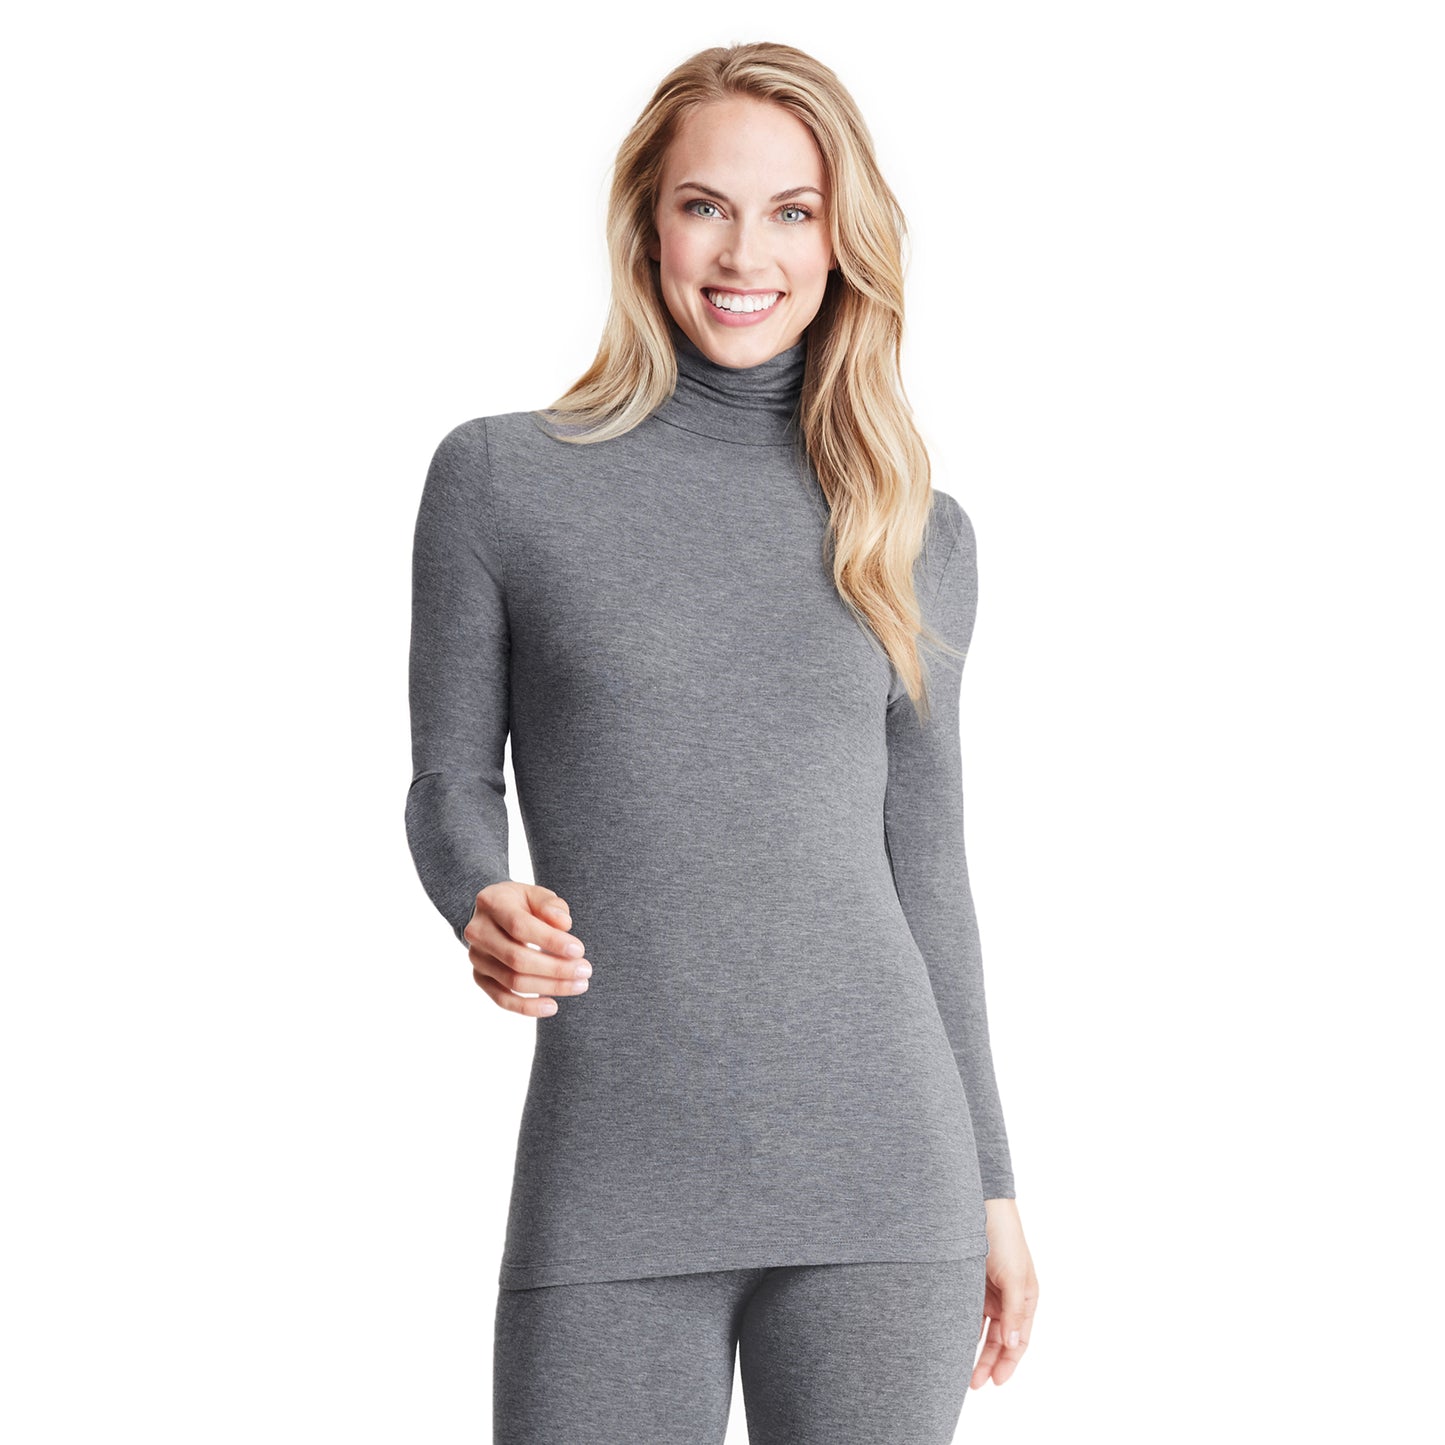 Charcoal Heather;Model is wearing size S. She is 5’9”, Bust 32”, Waist 25.5”, Hips 36”.@A lady wearing softwear with stretch long sleeve turtleneck